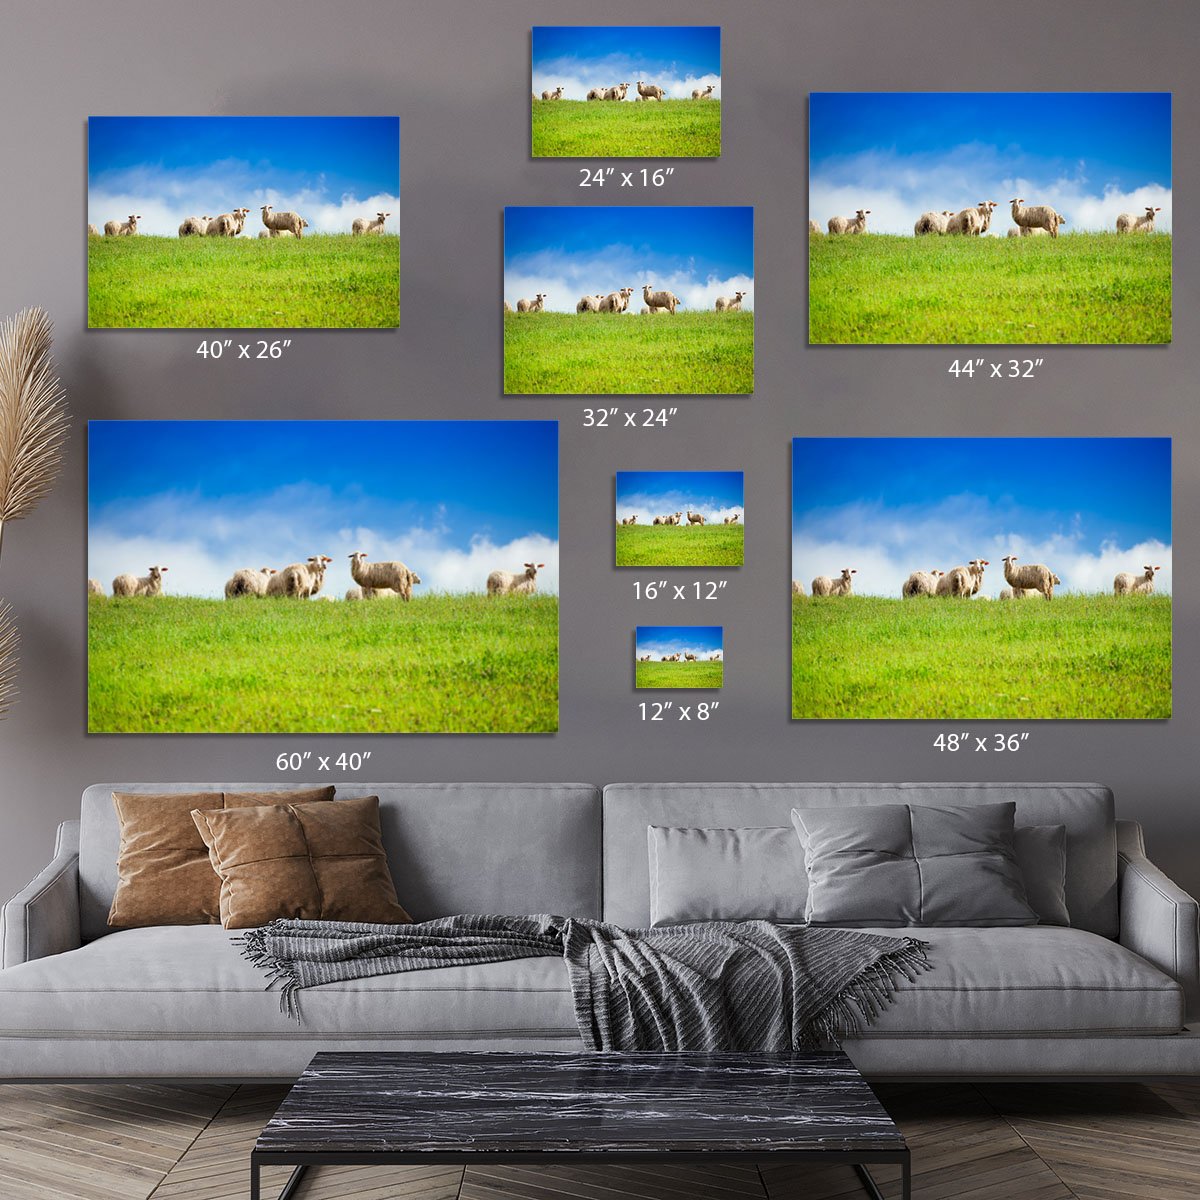 Two sheep looking at camera standing in herd Canvas Print or Poster